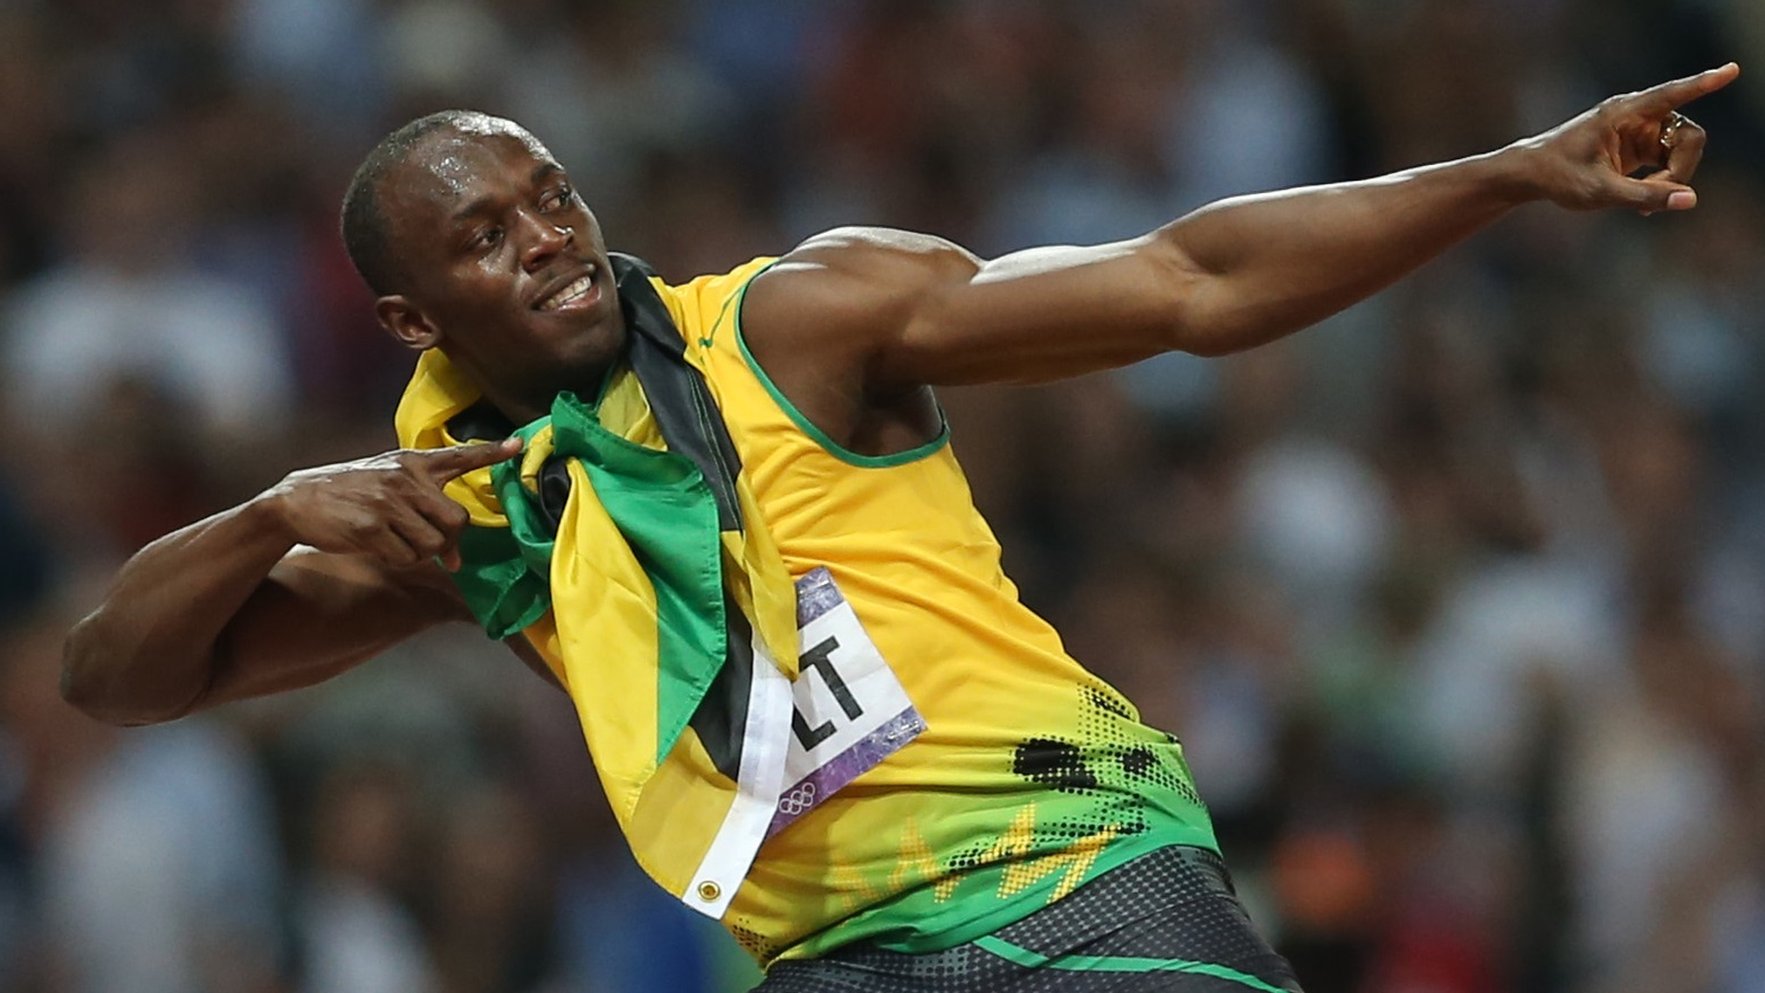 Usain Bolt files for trademark to protect victory pose. | LALJI Advocates  posted on the topic | LinkedIn